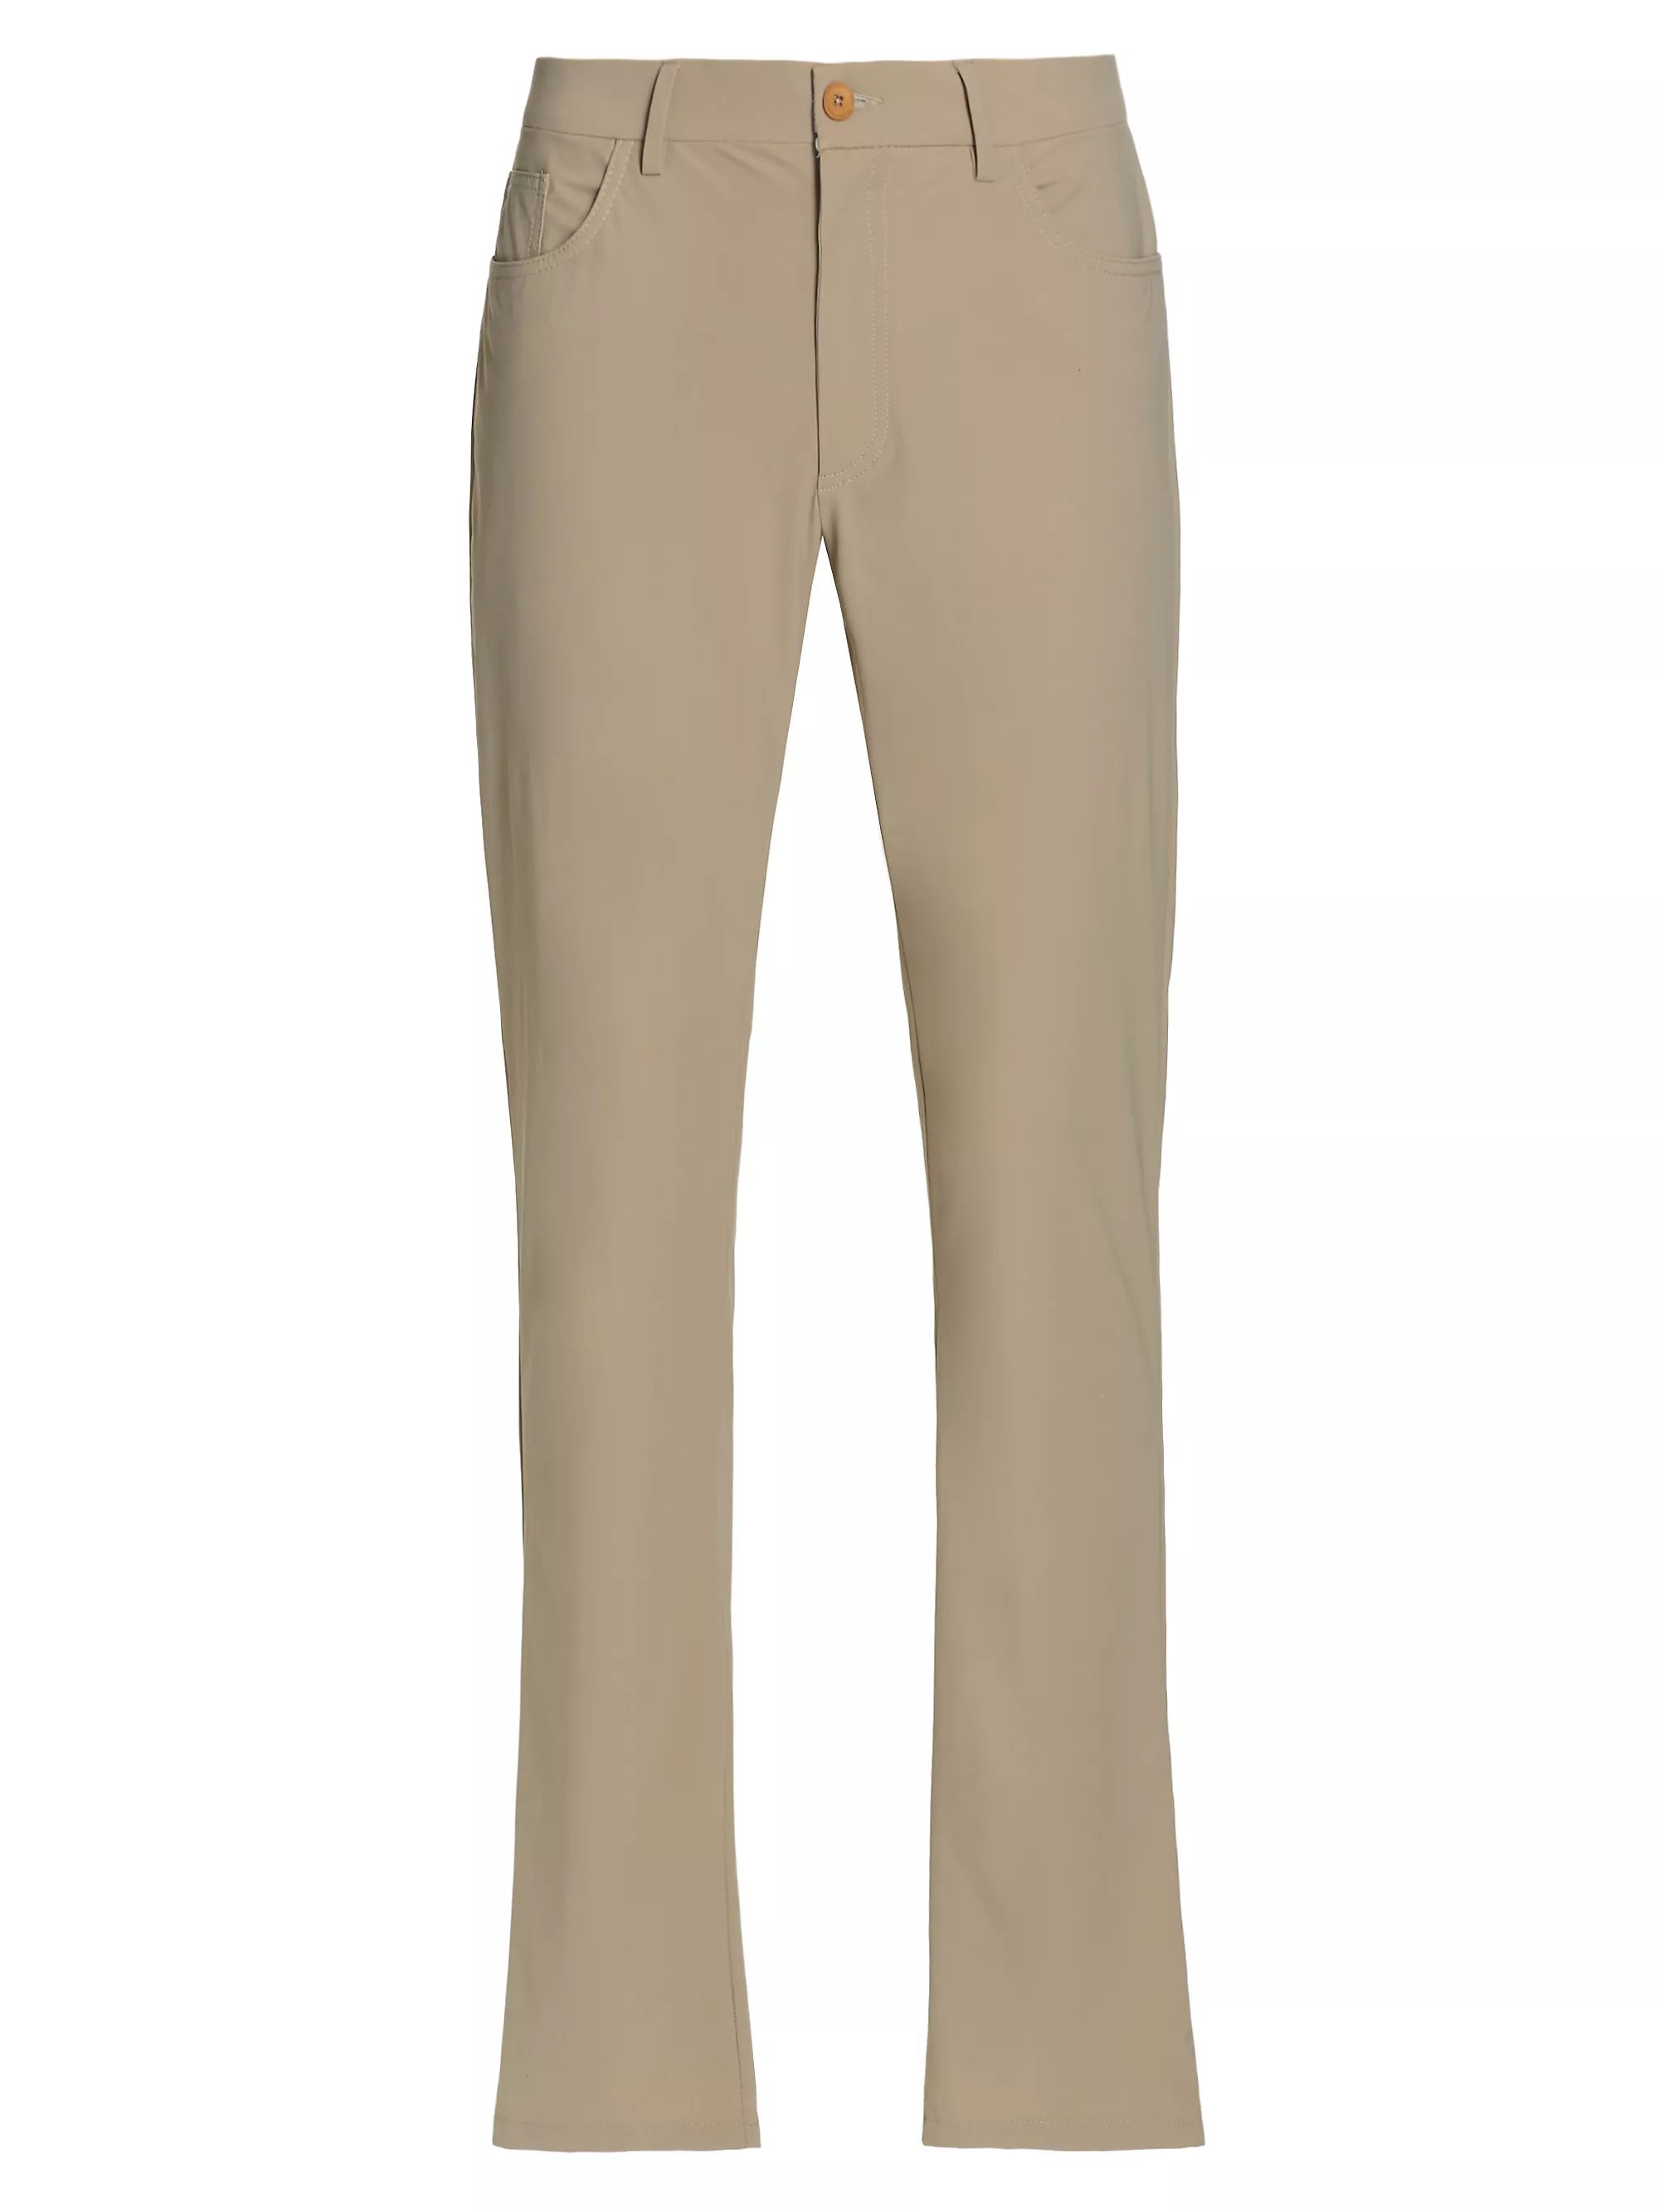 Shop Saks Fifth Avenue COLLECTION Stretch Traveler Pants | Saks Fifth Avenue | Saks Fifth Avenue